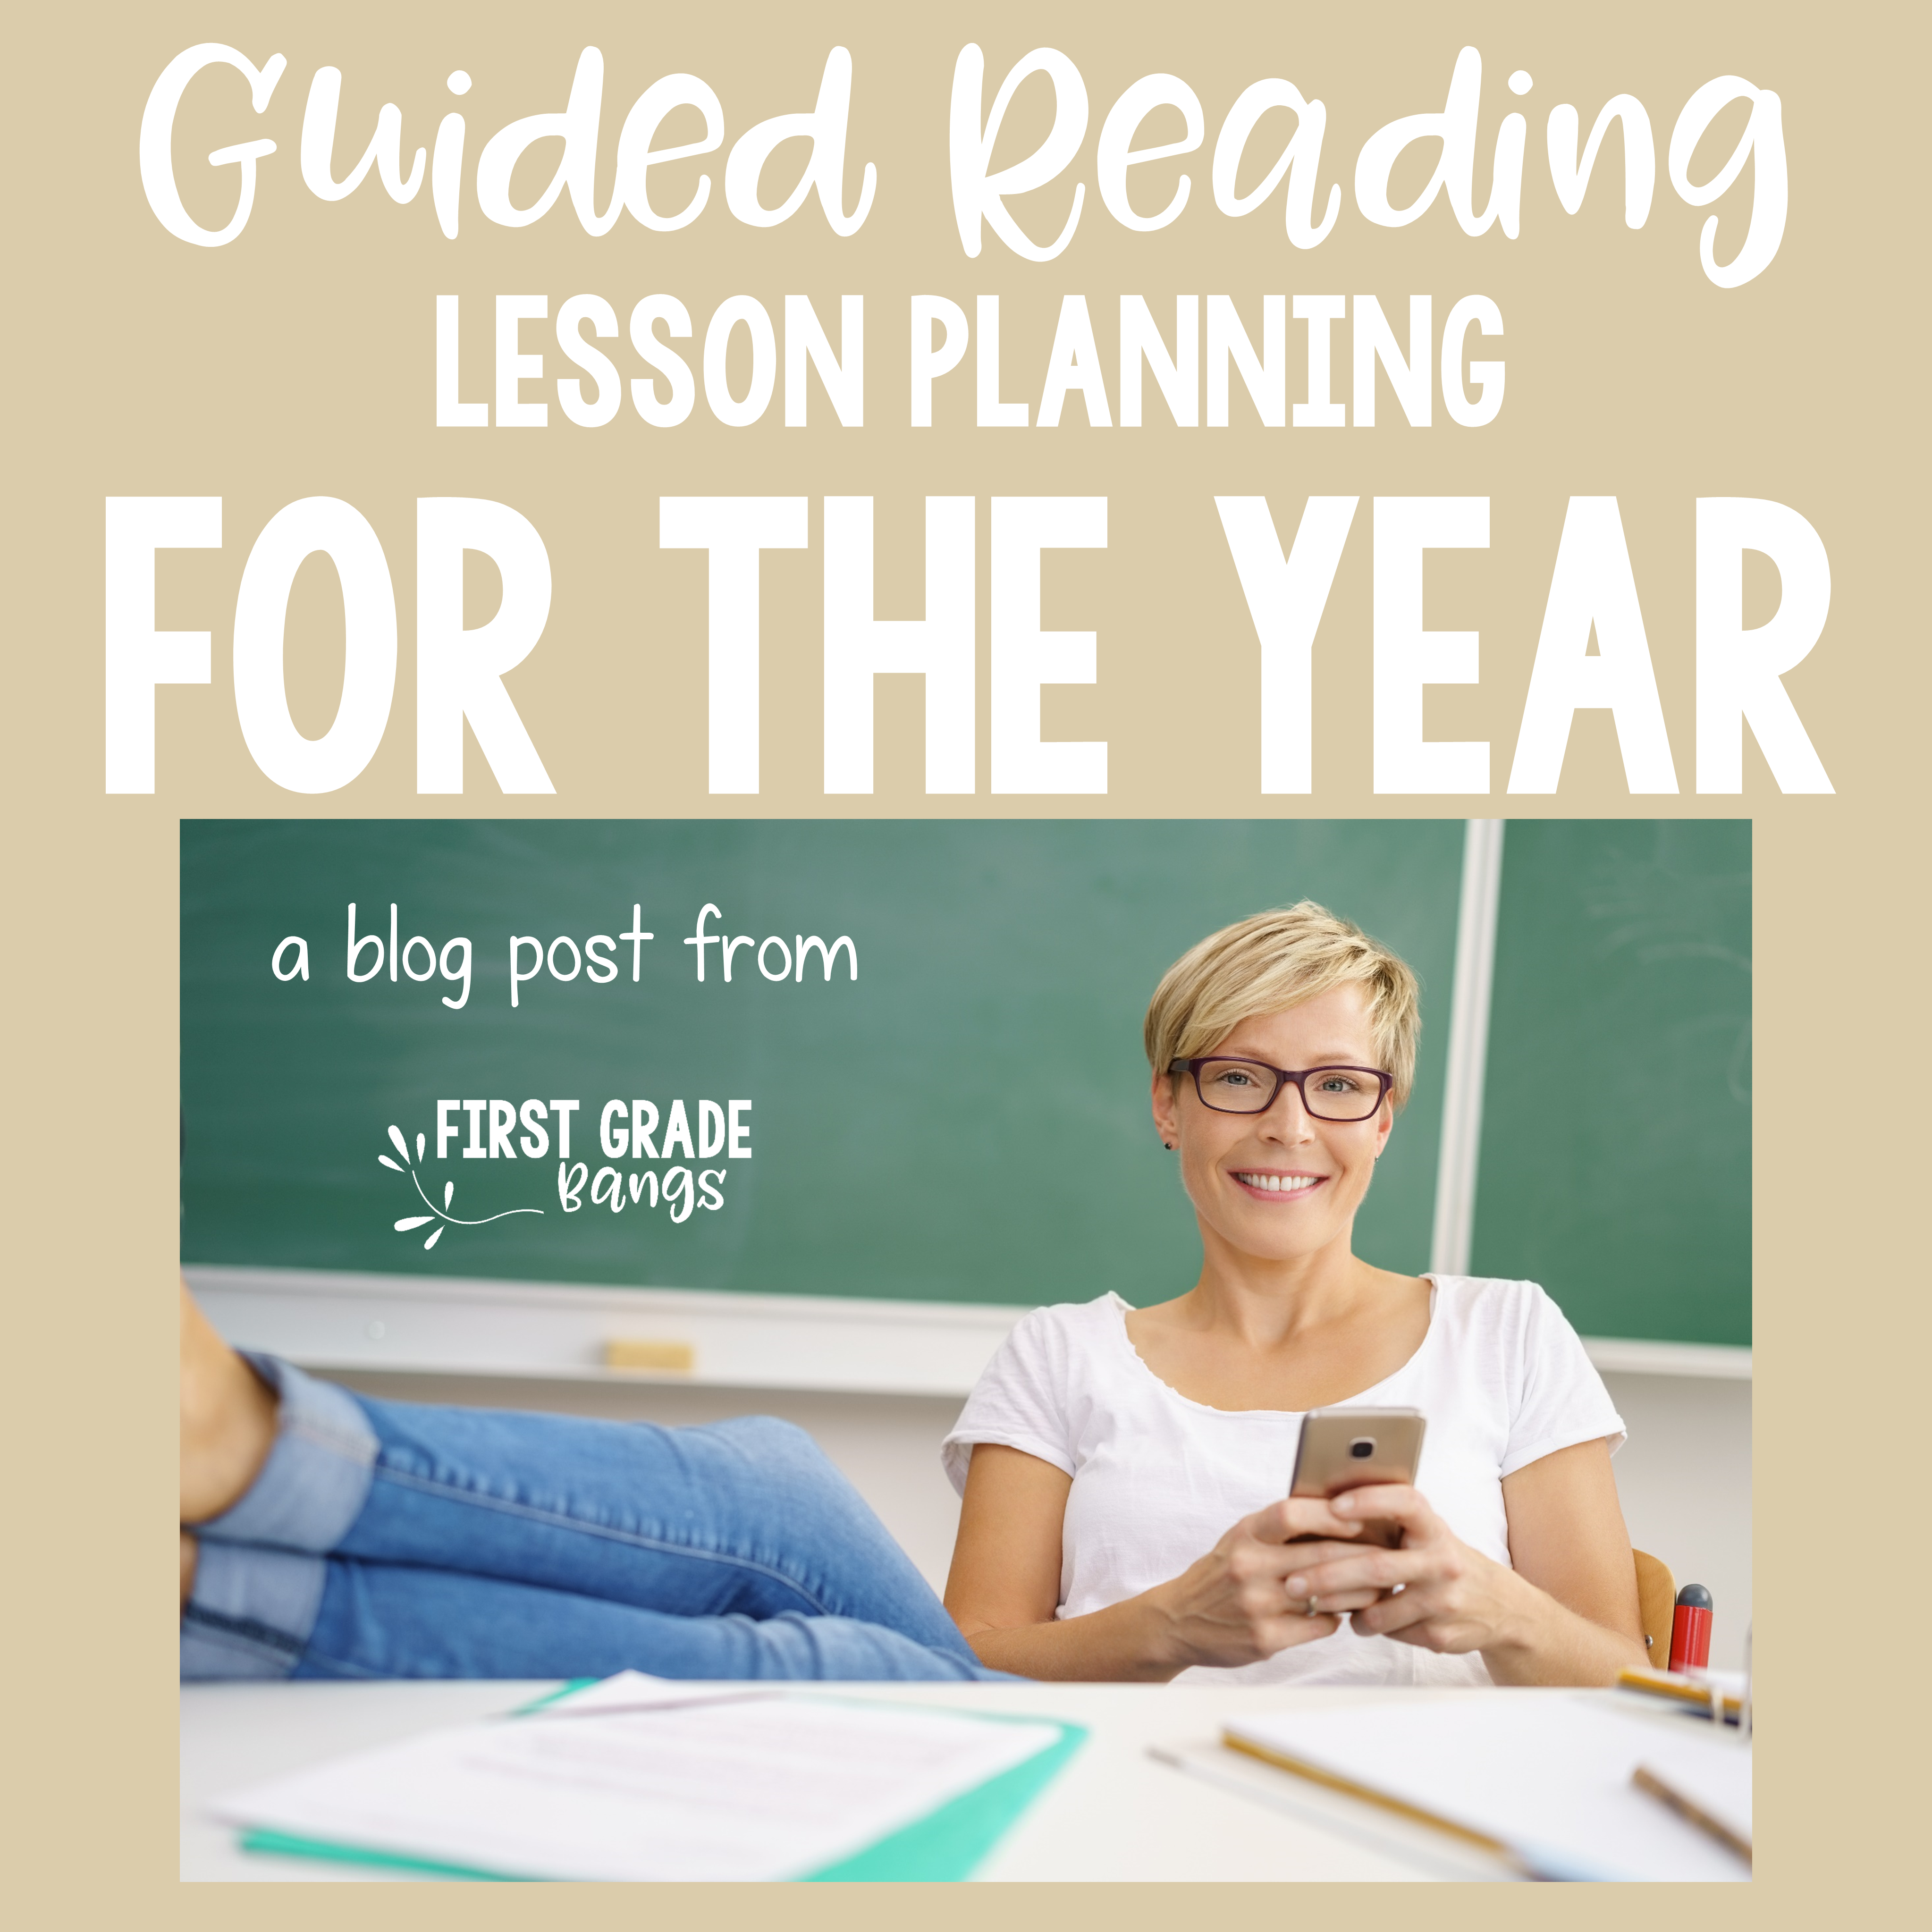 Guided Reading Lesson Planning FOR THE YEAR